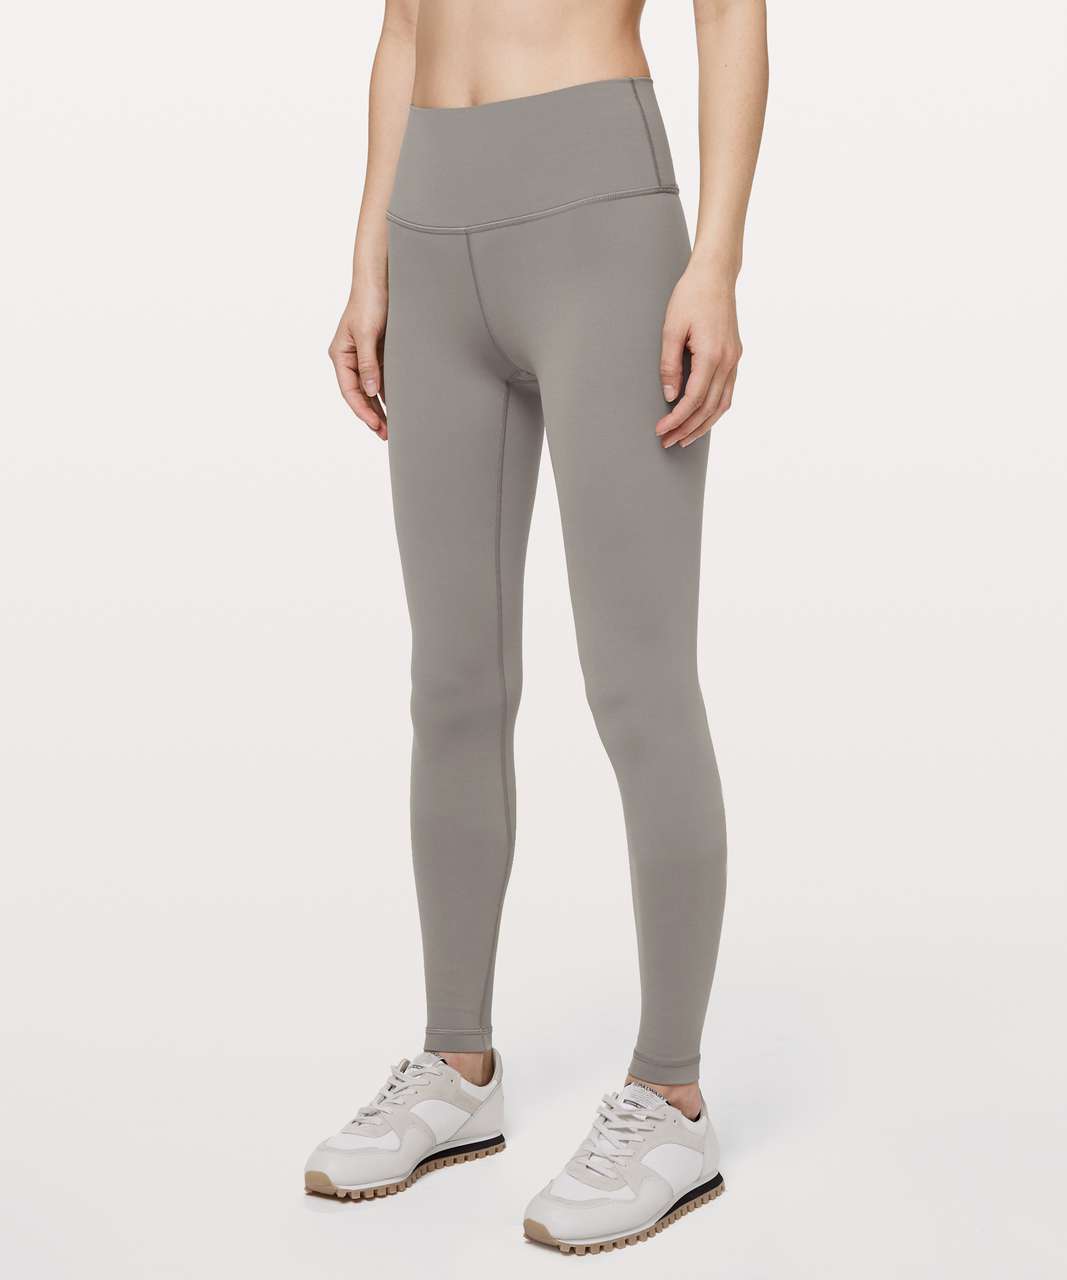 Lululemon Wunder Under High-Rise Tight 31" *Full-On Luxtreme - Carbon Dust